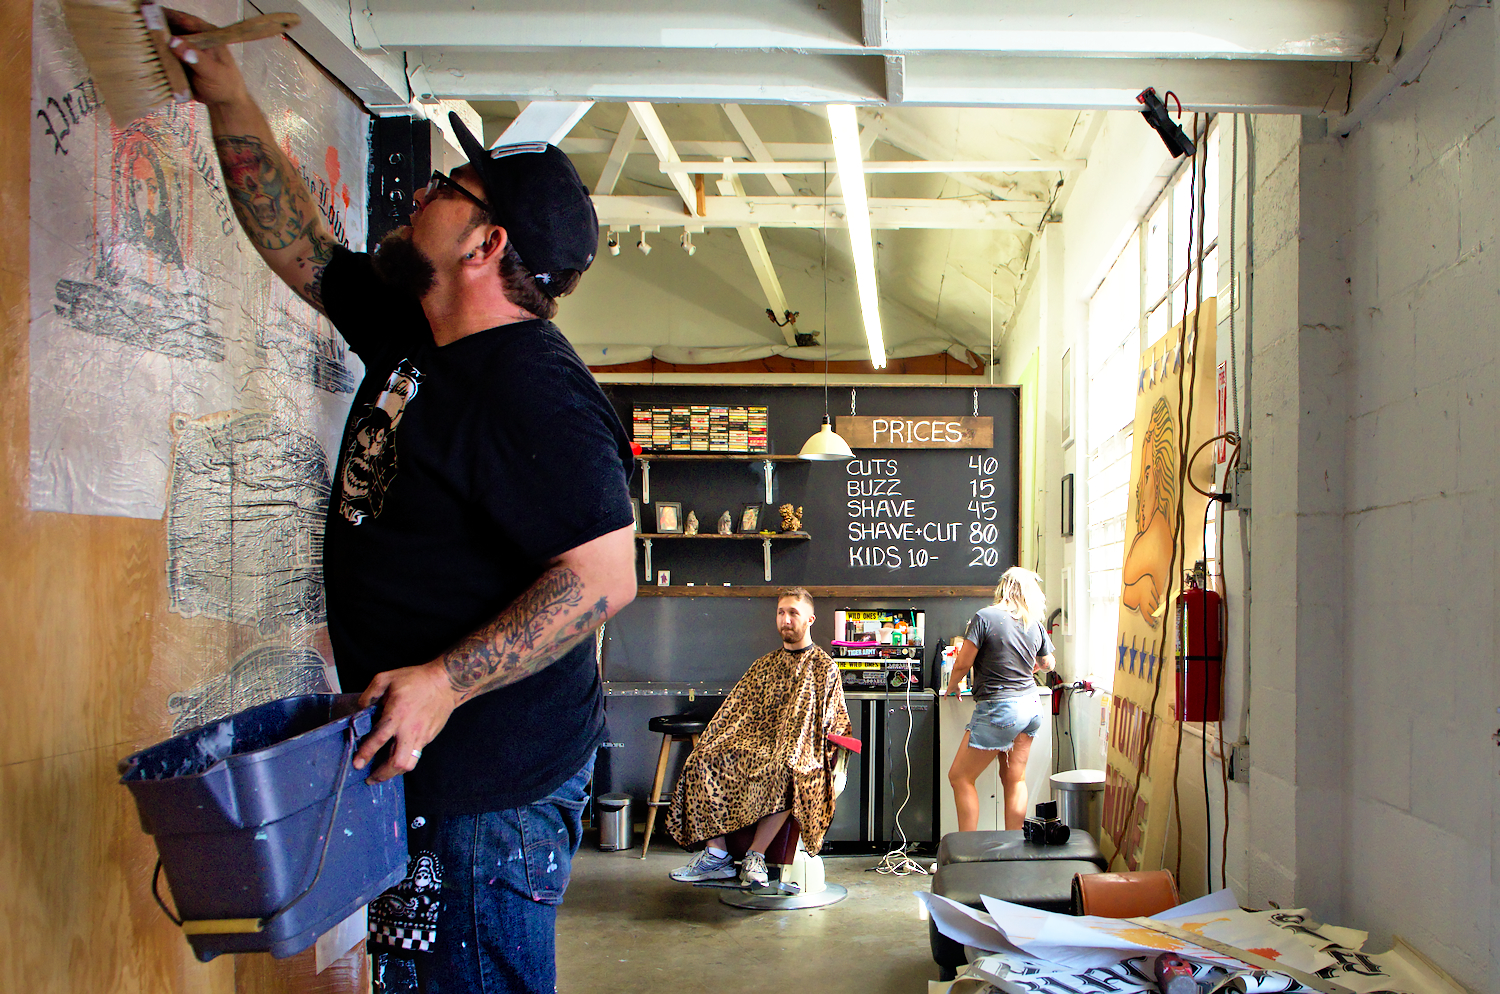  The Nomad centre mixes and emulates a large variety of art forms and actors all around the printmaking core studio: A gallery, art shows, a bookstore, a music studio, and even a tatoo and haircut studios. "People sometimes come first for a haircut, 